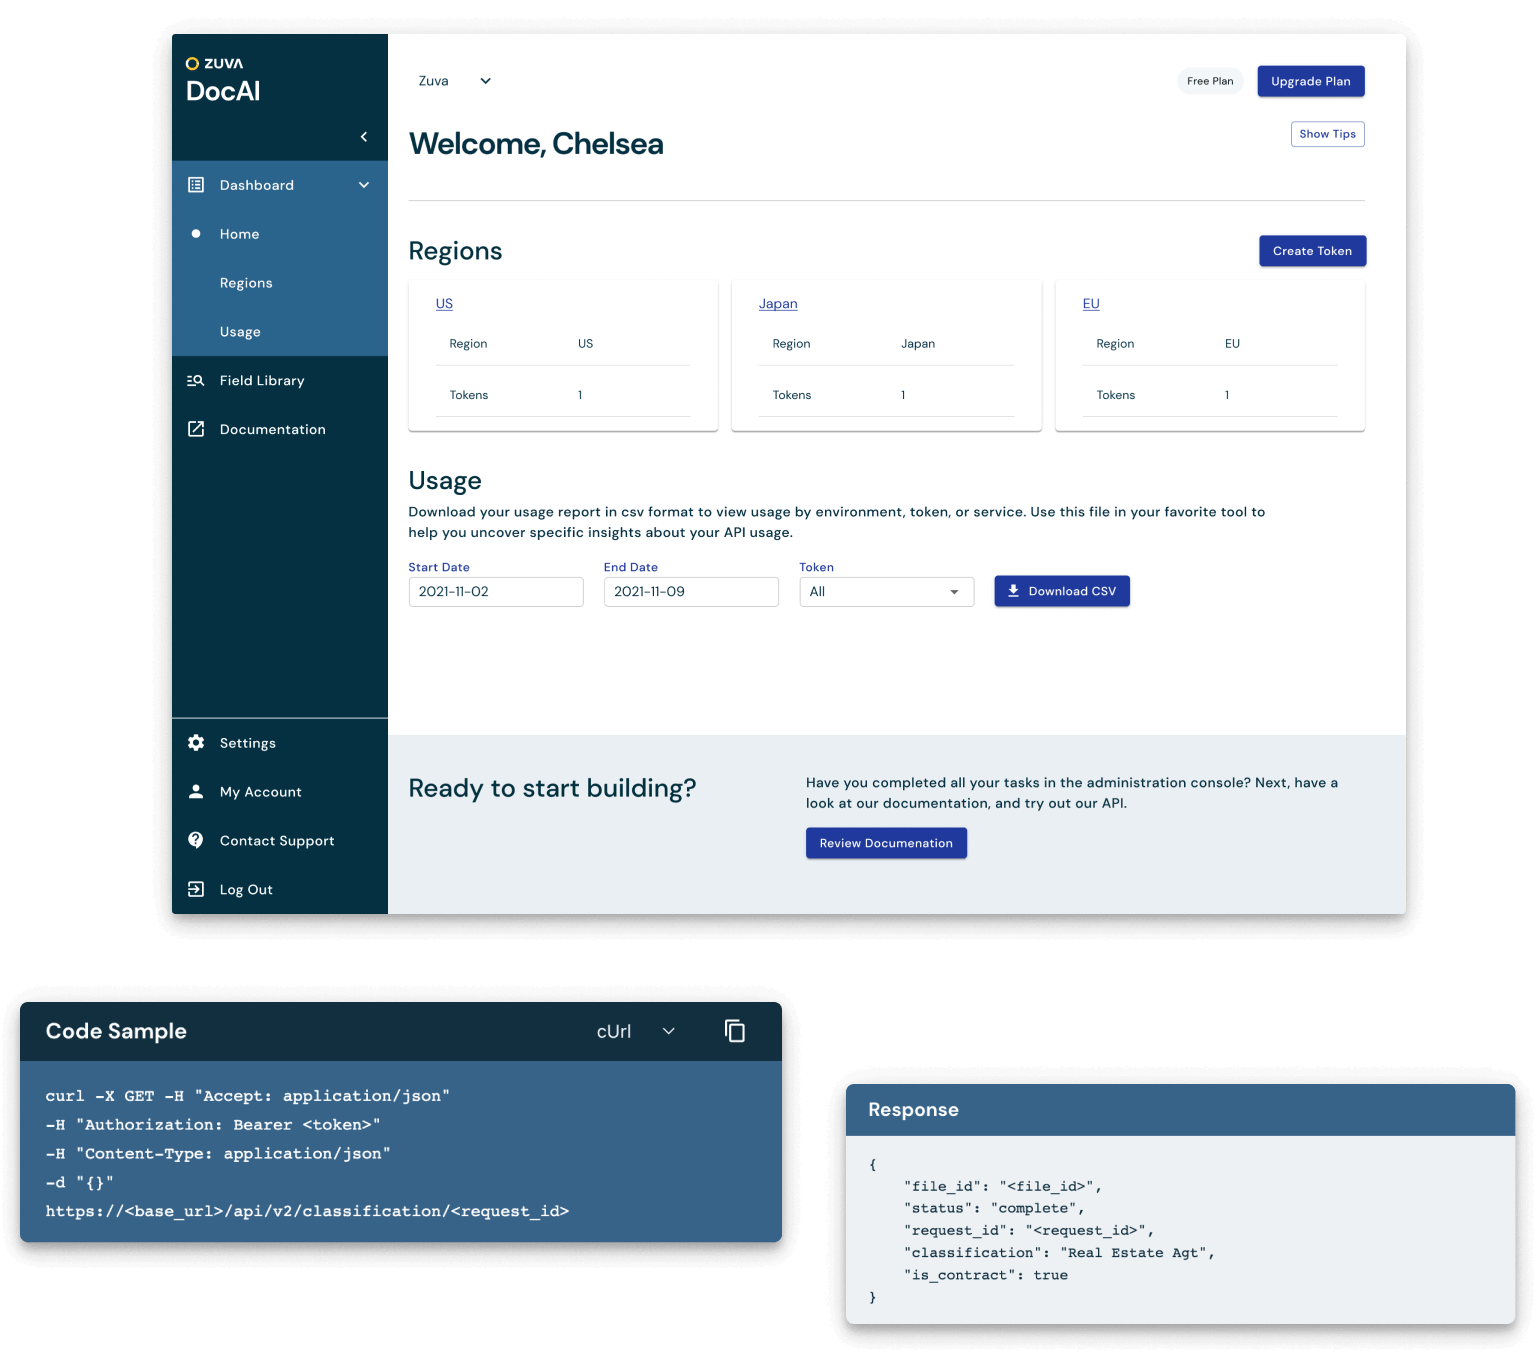 DocAI Console and a sample request and response